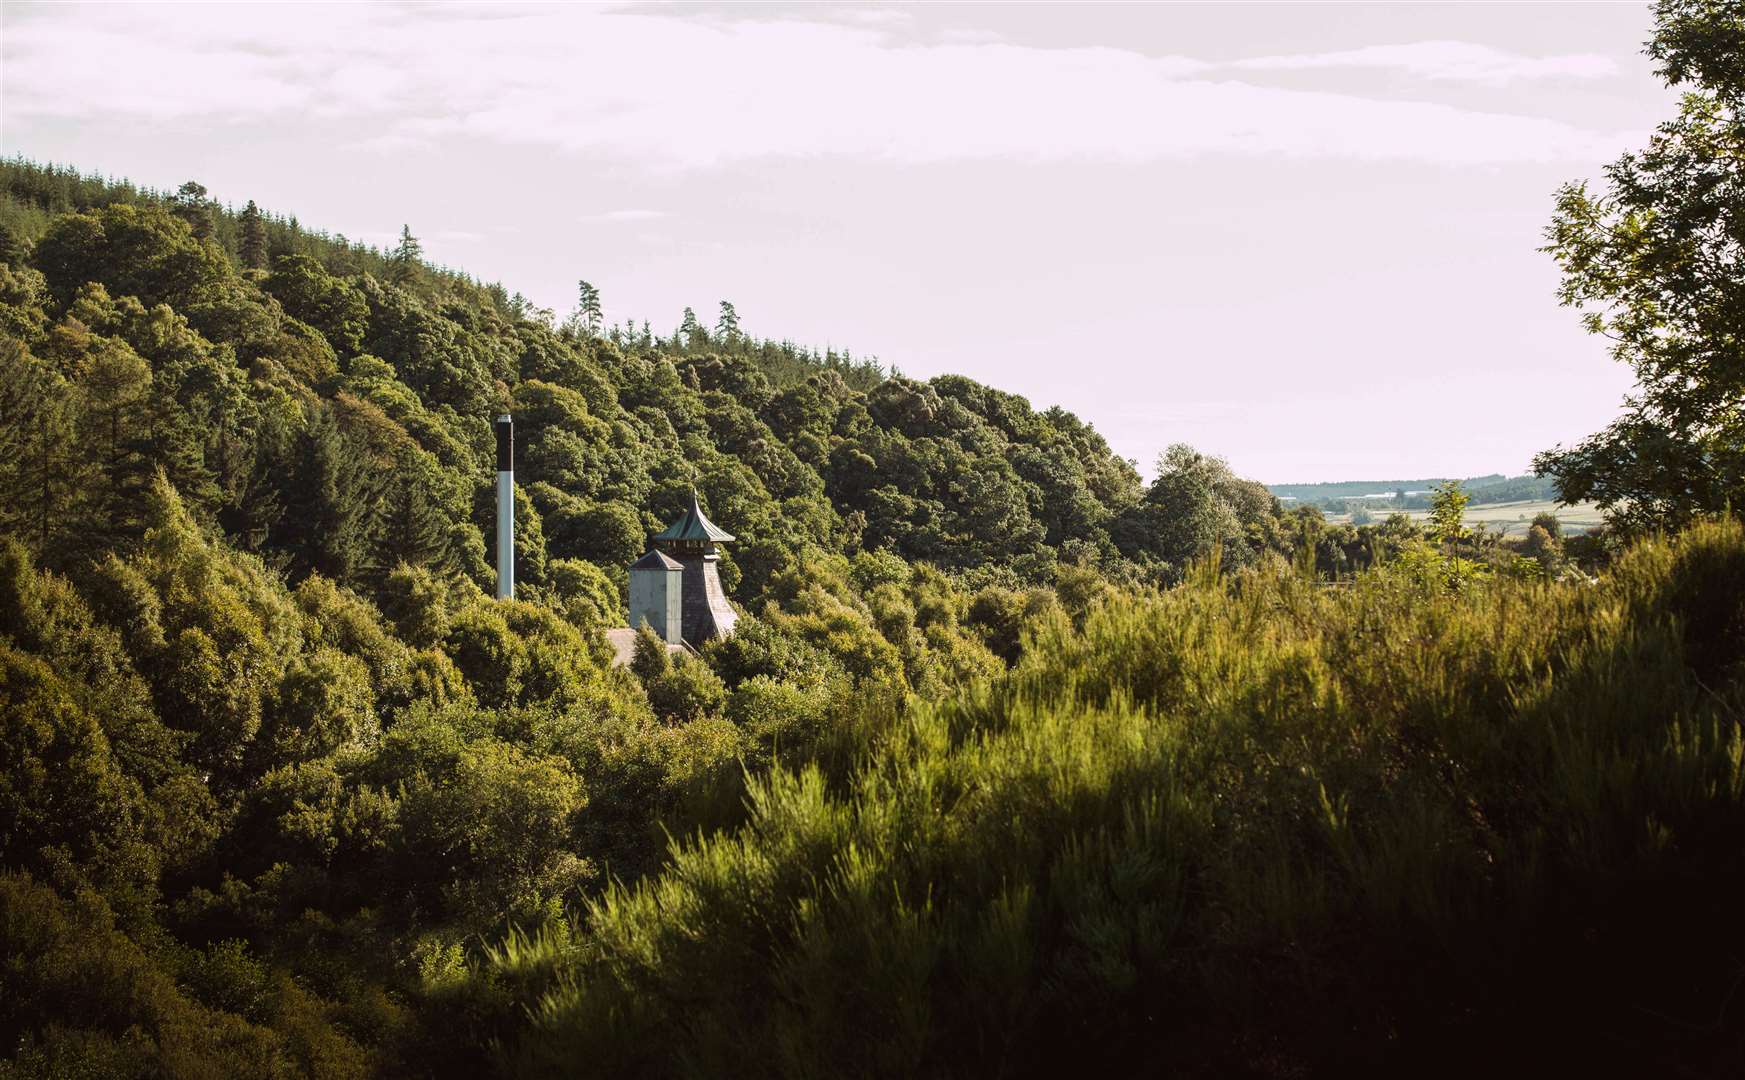 Speyburn Distillery nestling among the trees. Picture: Reuben Paris